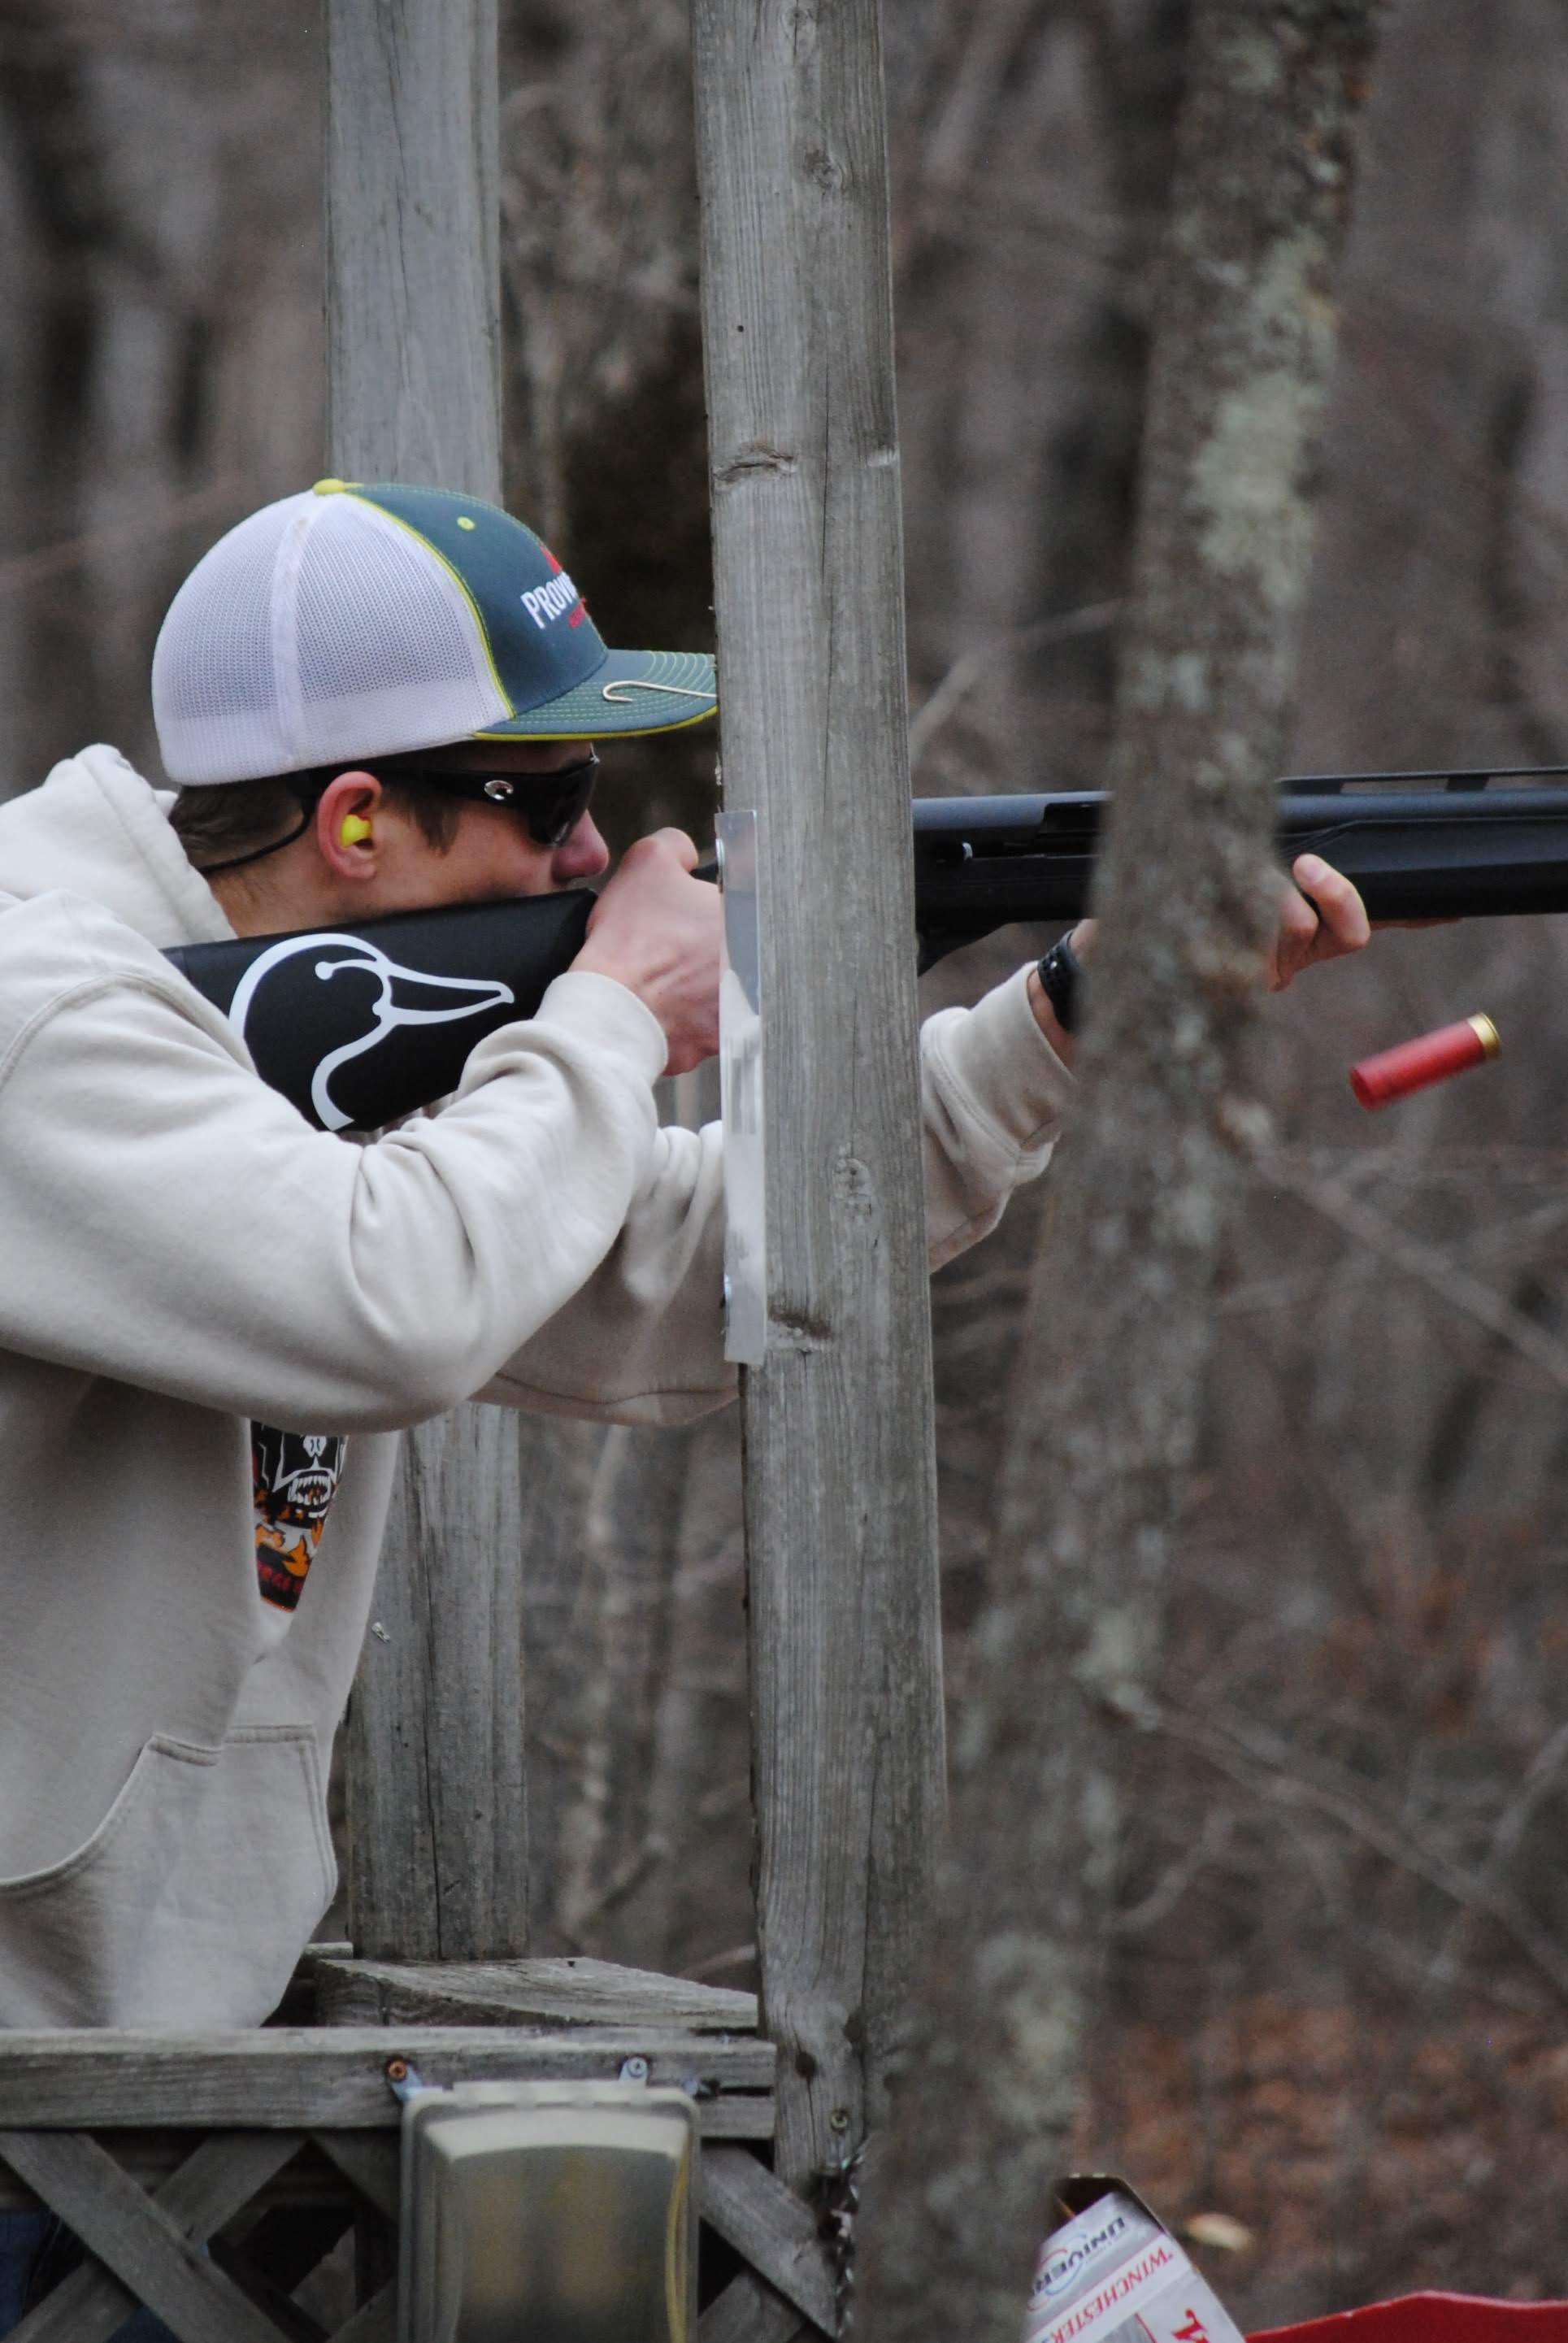 Youth shooting a shotgun, wearing eye and ear protection.  Shotgun shell caught in the air after being ejected from the gun.